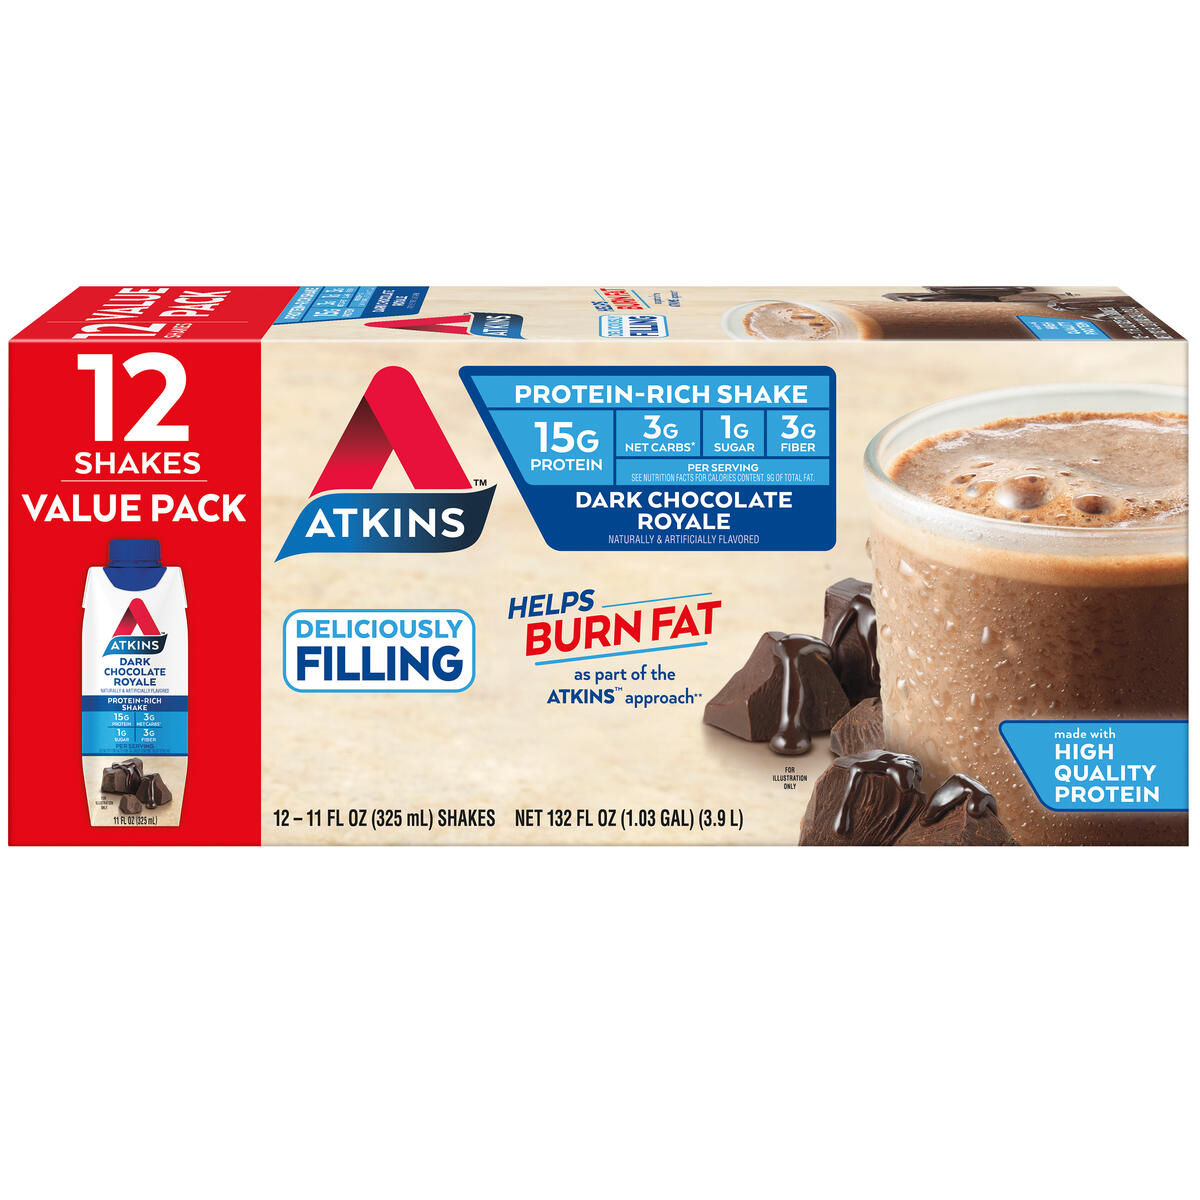 Atkins Dark Chocolate Royale Protein Shake, High Protein, Low Carb, Low Sugar, Keto Friendly, 12 Ct - image 1 of 9